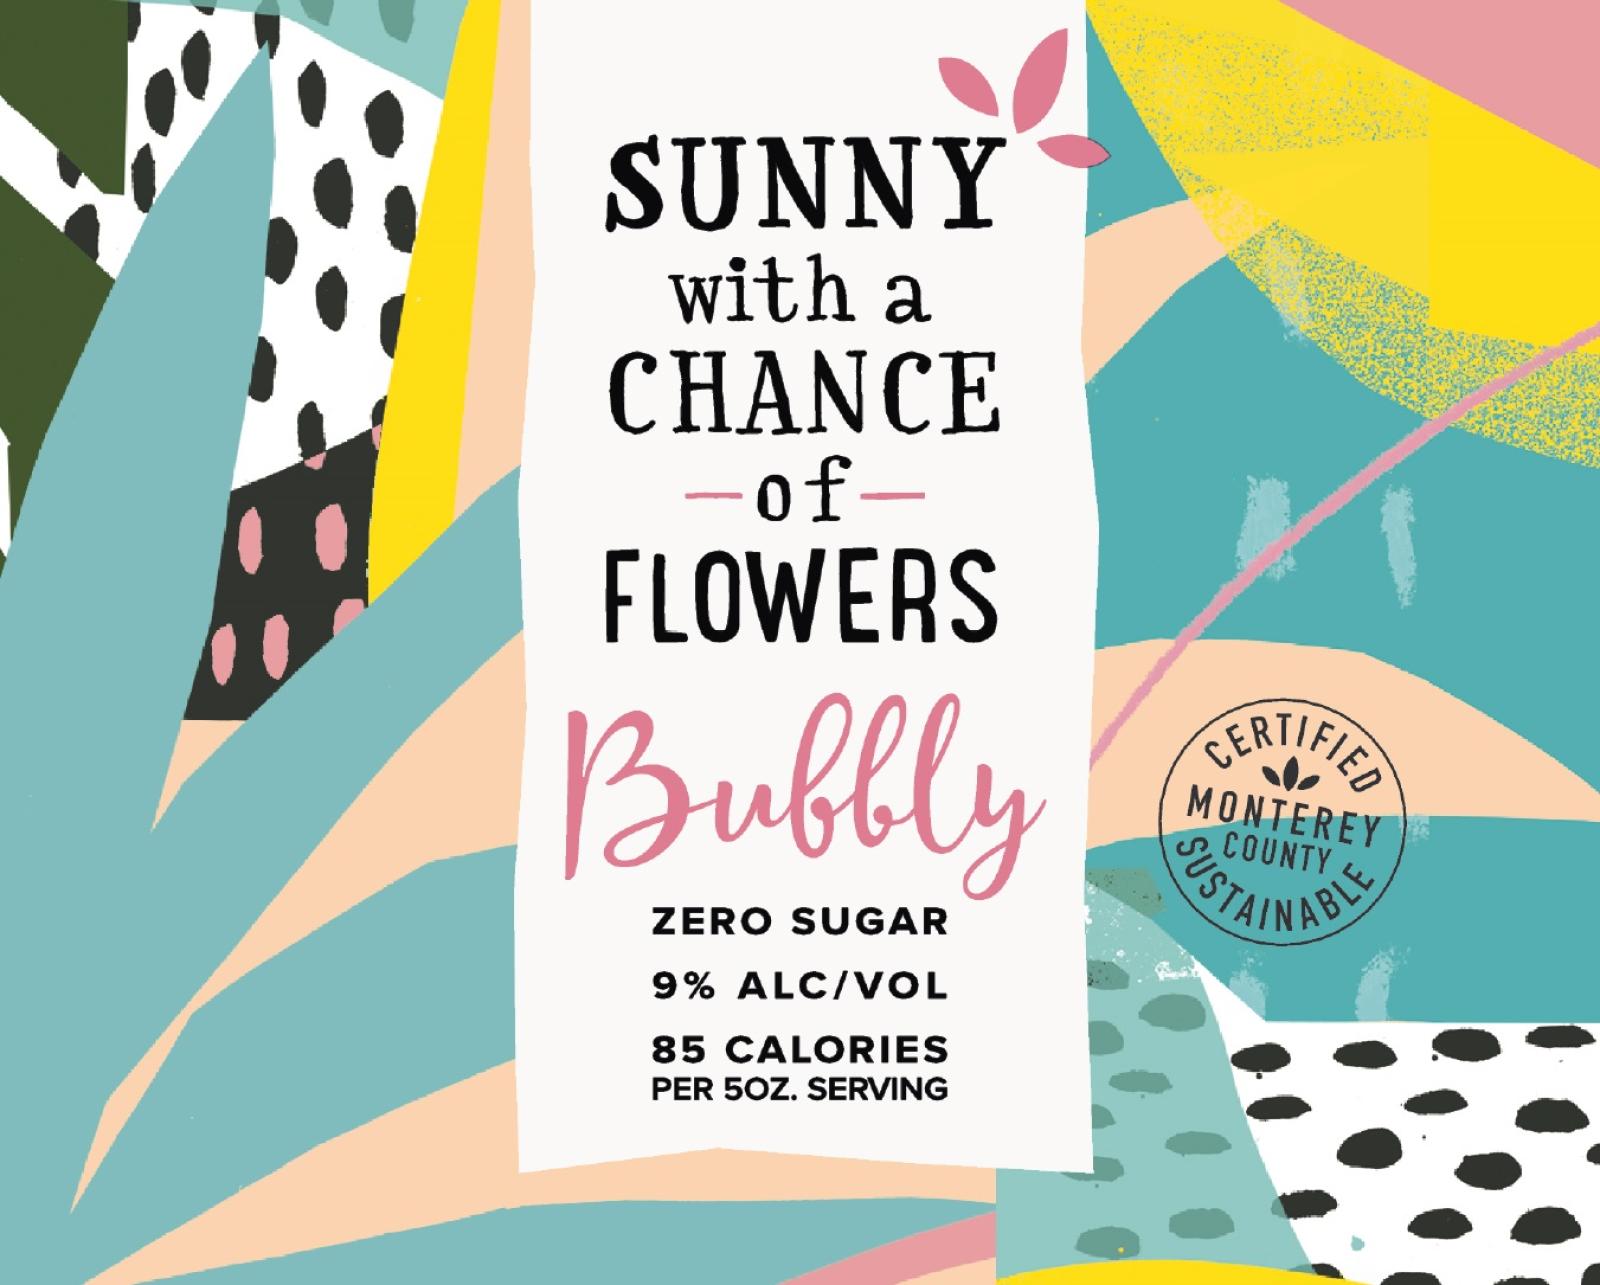 Sunny with a chance of flowers bubbly rose